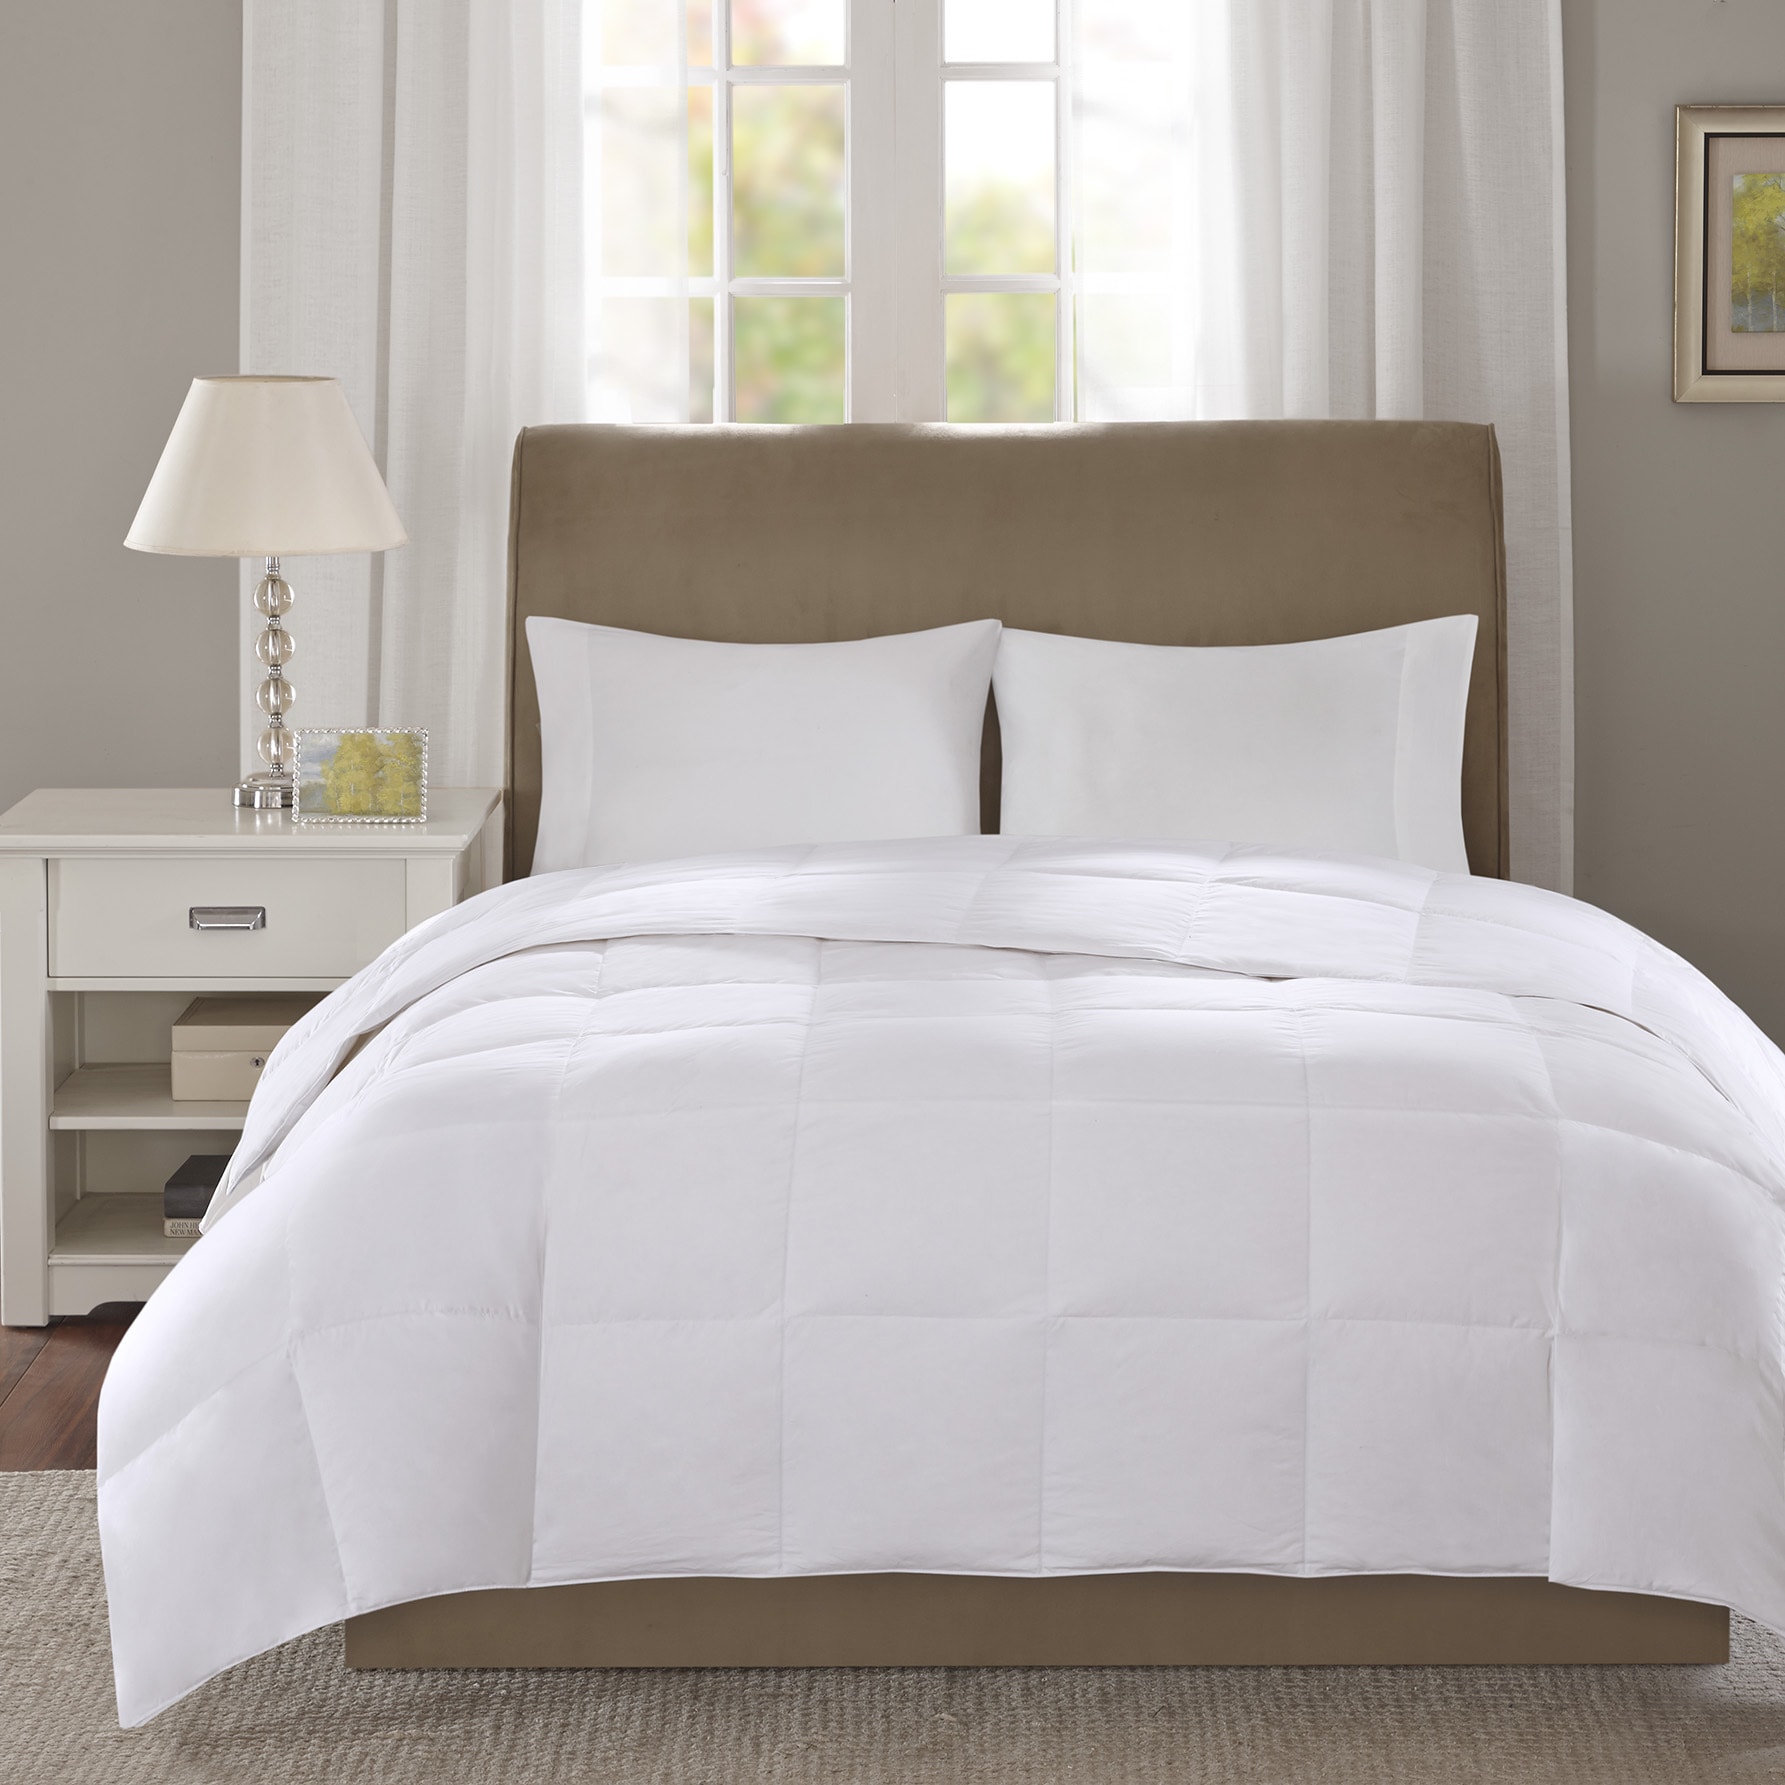 True North by Sleep Philosophy Heavy Warmth Goose Feather and Down Oversize  Comforter